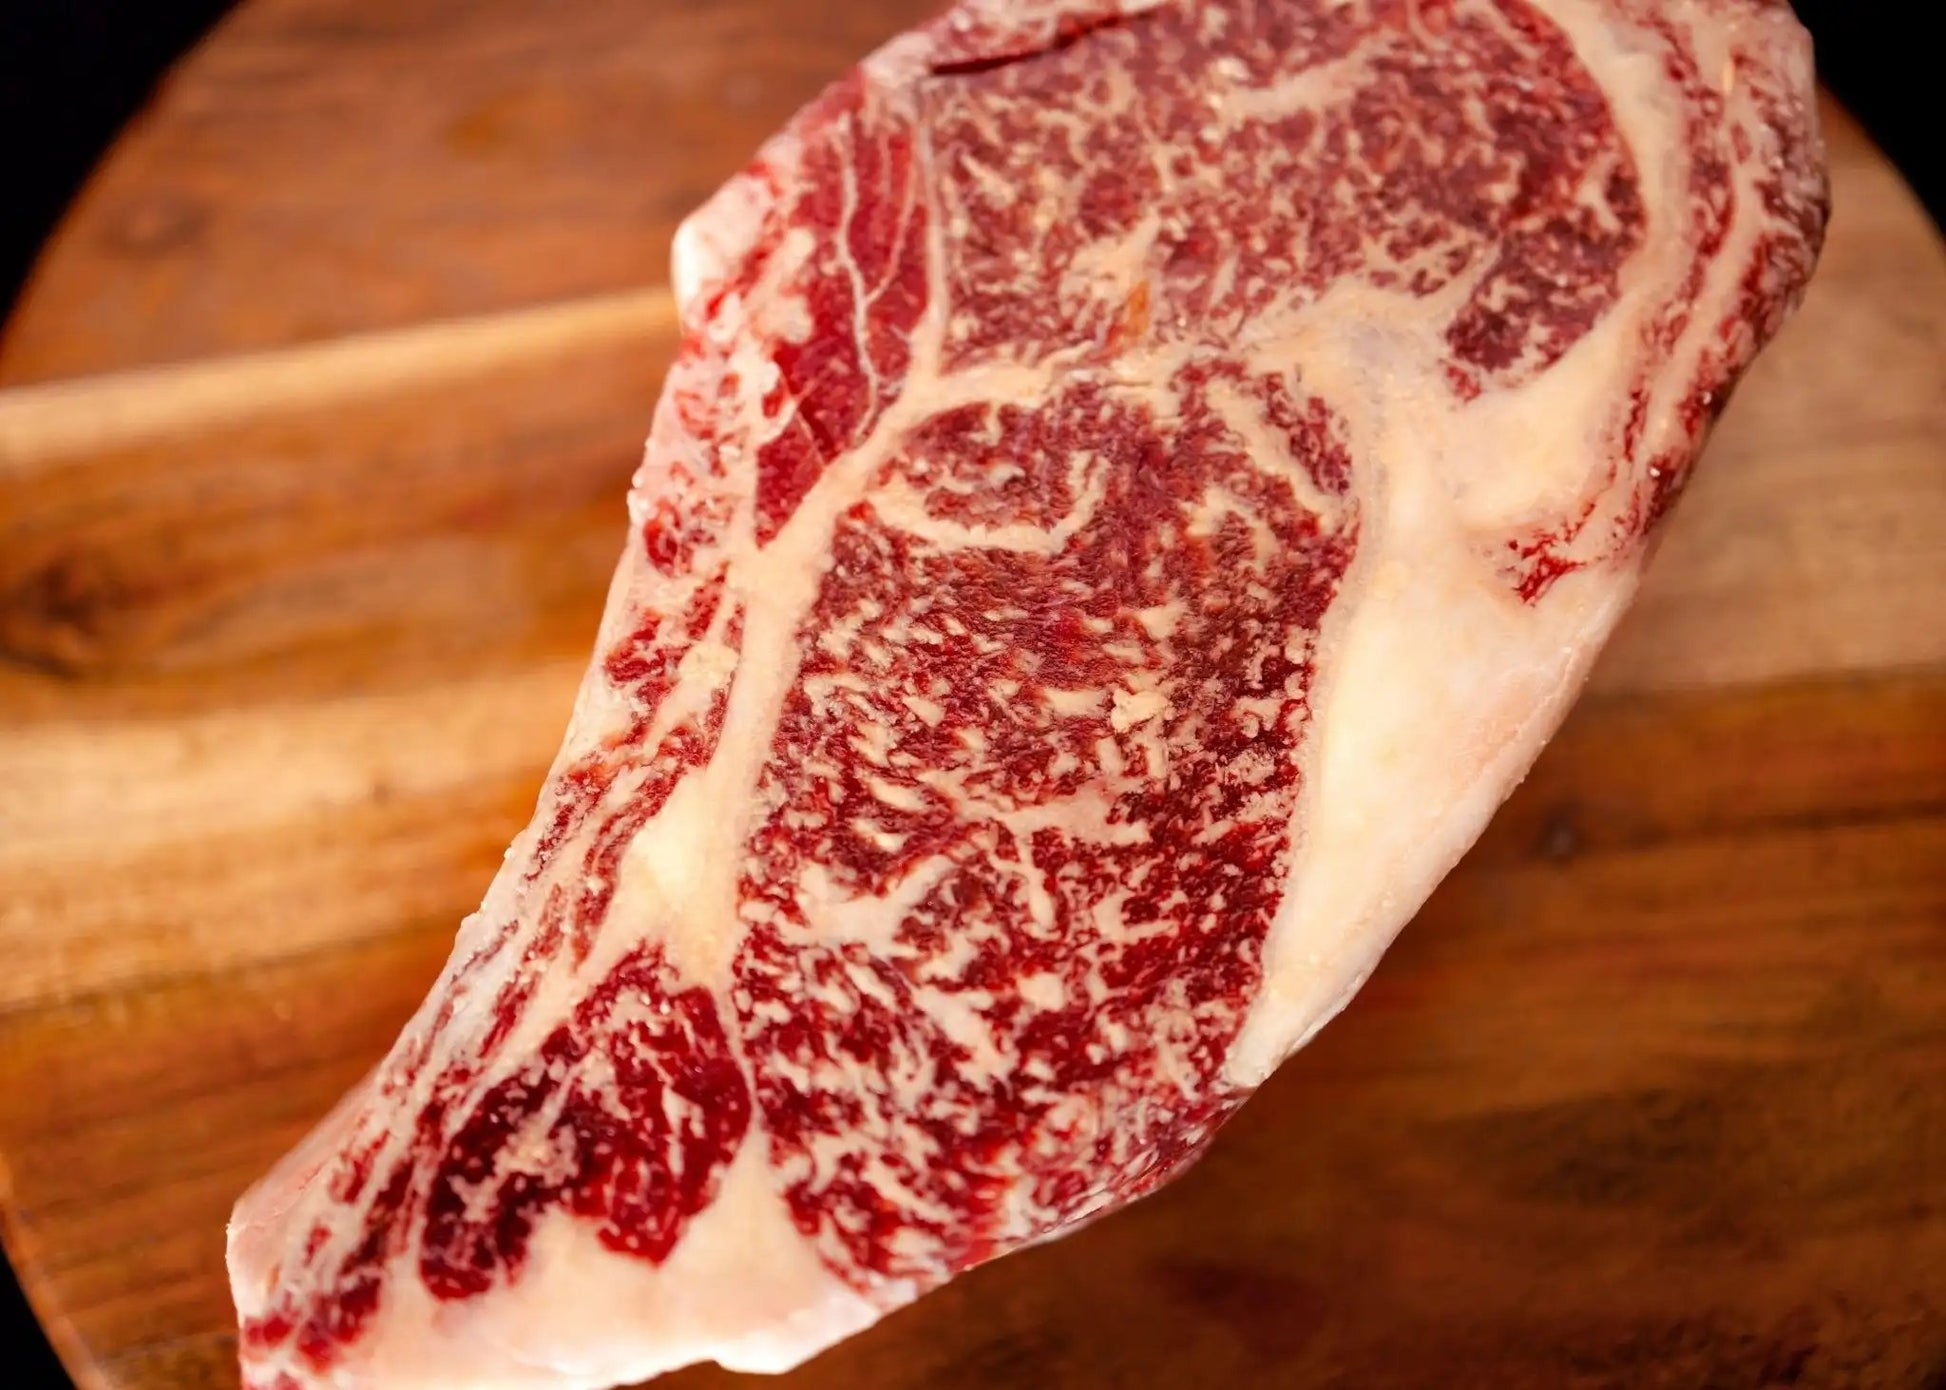 100% All-Natural Grass-Fed Pasture-Raised Wagyu Bone-In Ribeye SteakHufeisen Ranch's 100% All-Natural Grass-Fed Pasture-Raised Wagyu Bone-In Ribeye Steak is the perfect indulgence for any beef lover. Cut from the center of the rib pr100%The Hufeisen-Ranch (WYO Wagyu)